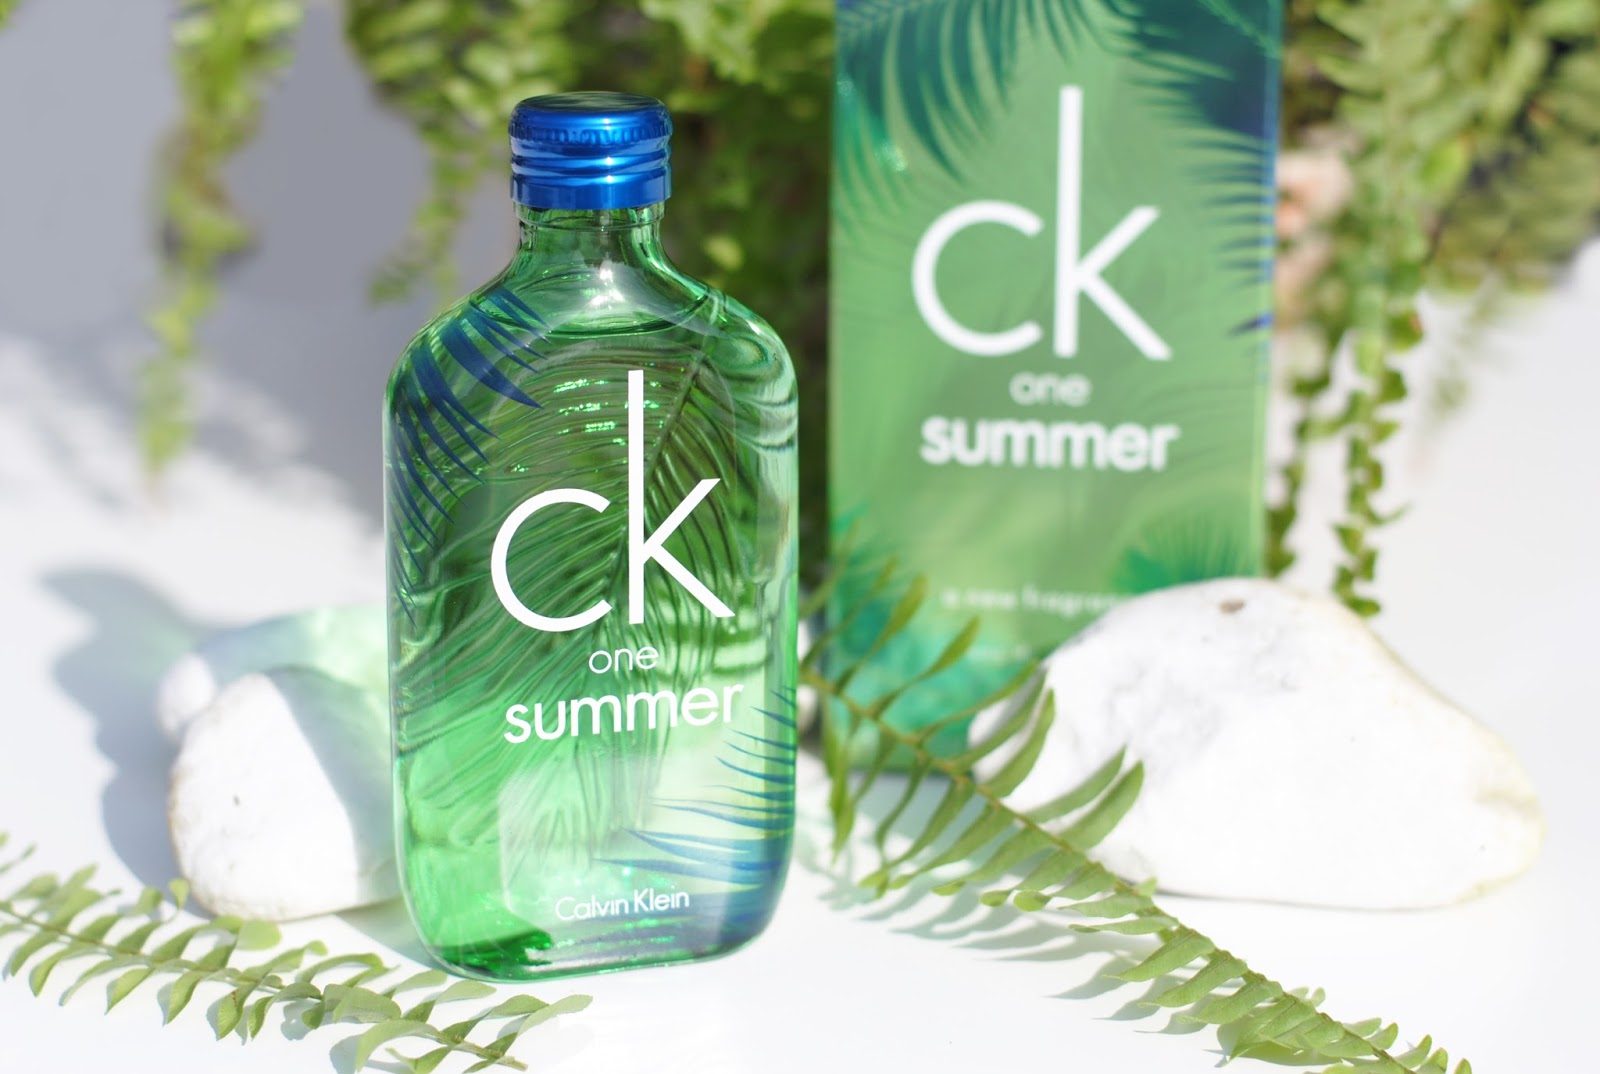 This one summer. CK one Summer. CK one ly 943.